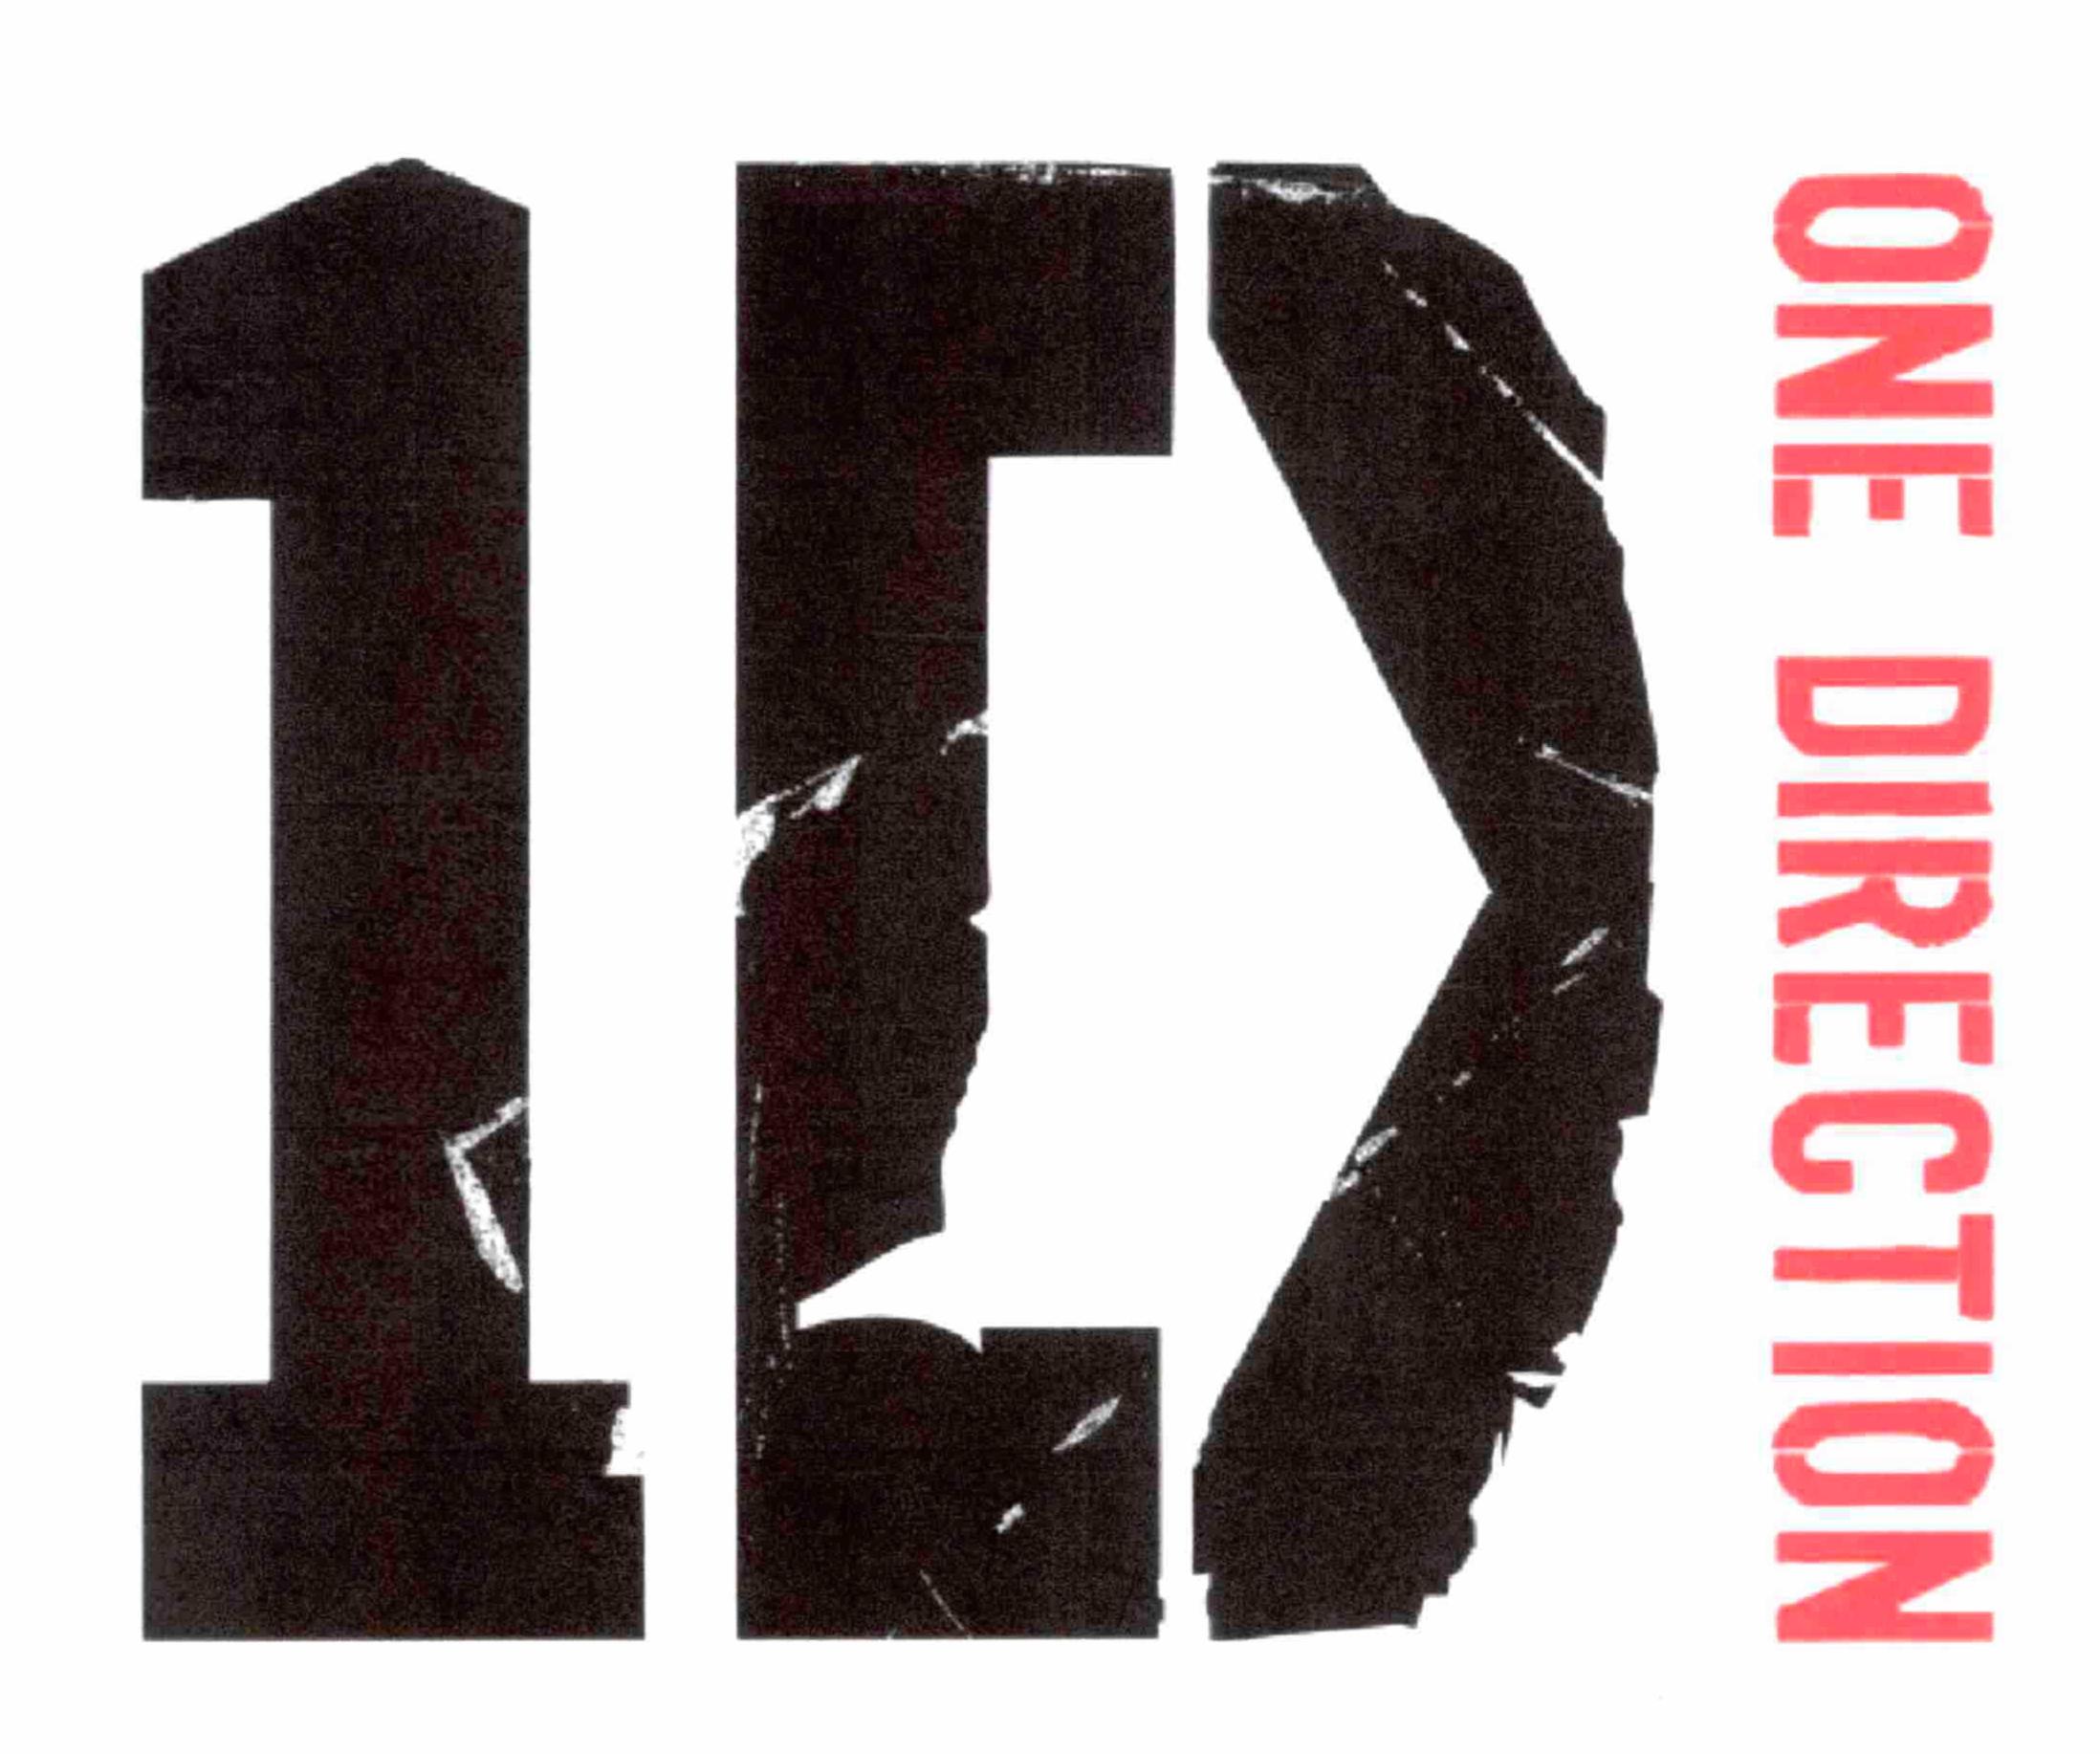  1D ONE DIRECTION